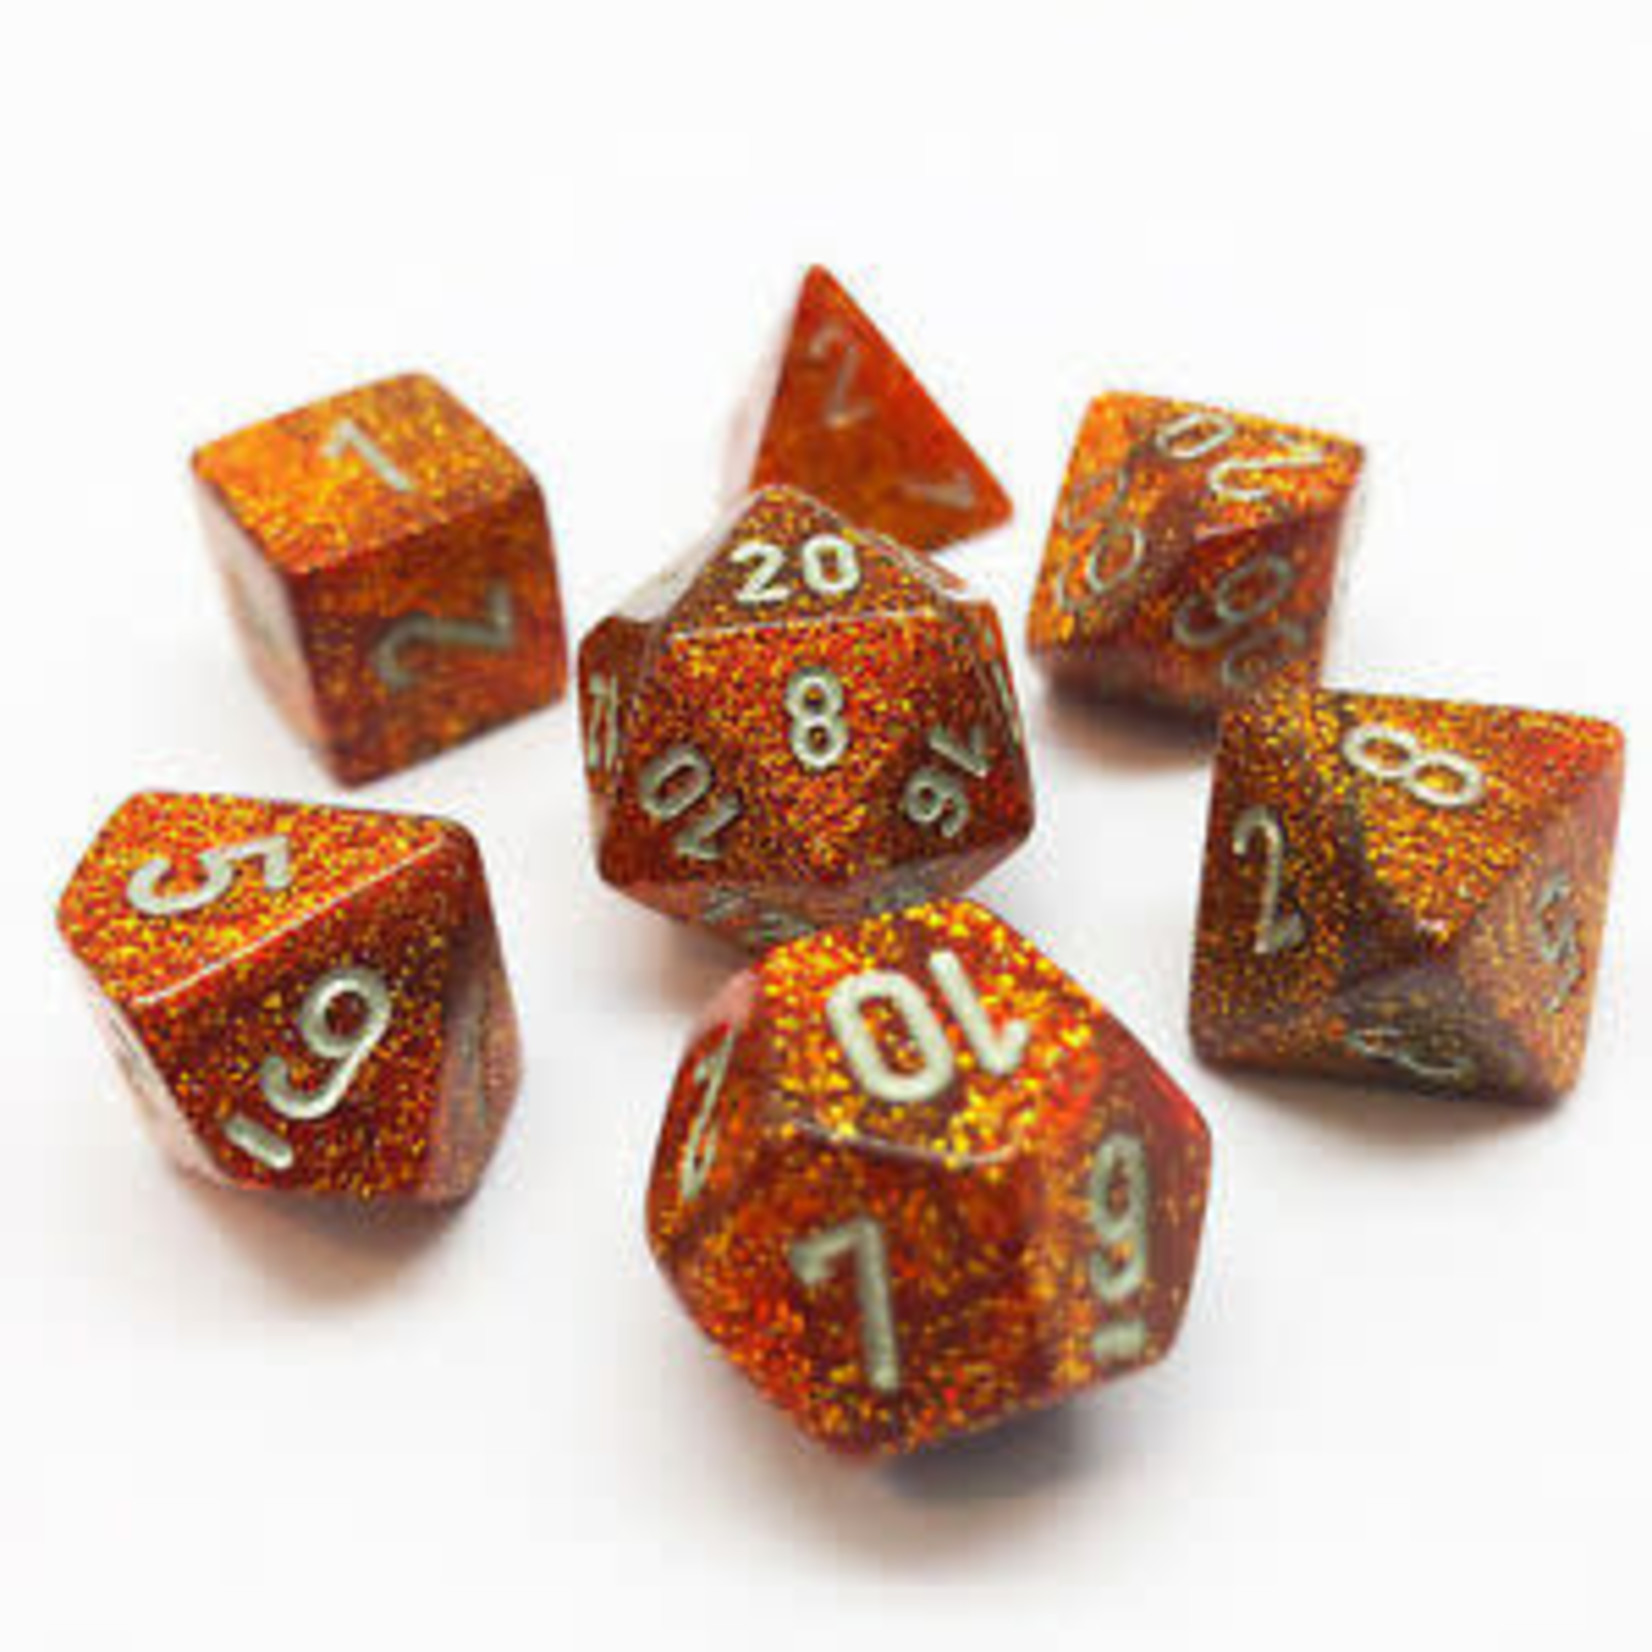 Chessex 7-Piece Dice Set: Glitter Gold with Silver Numbers